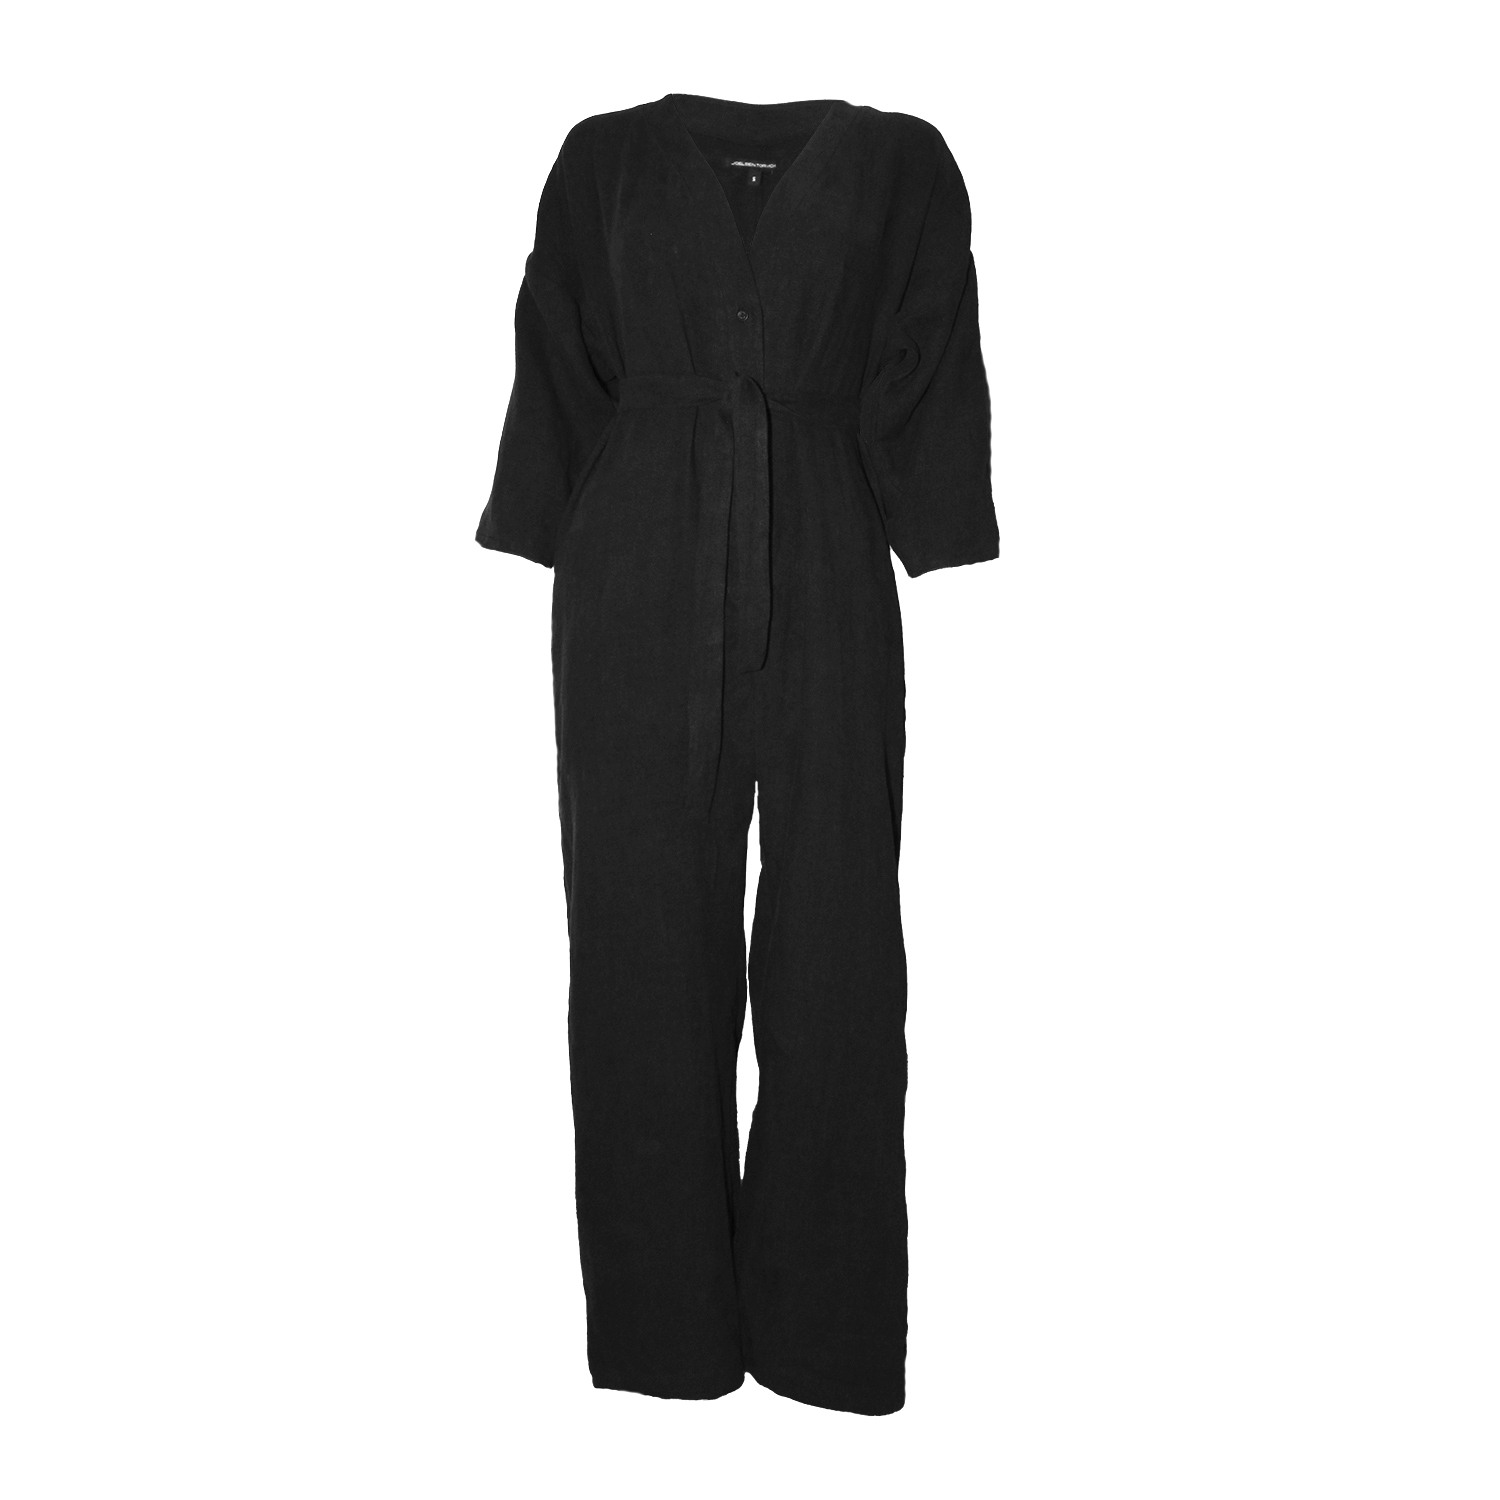 Women’s Wide Leg Button Down Belted Jumpsuit - Black Extra Large Joeleen Torvick